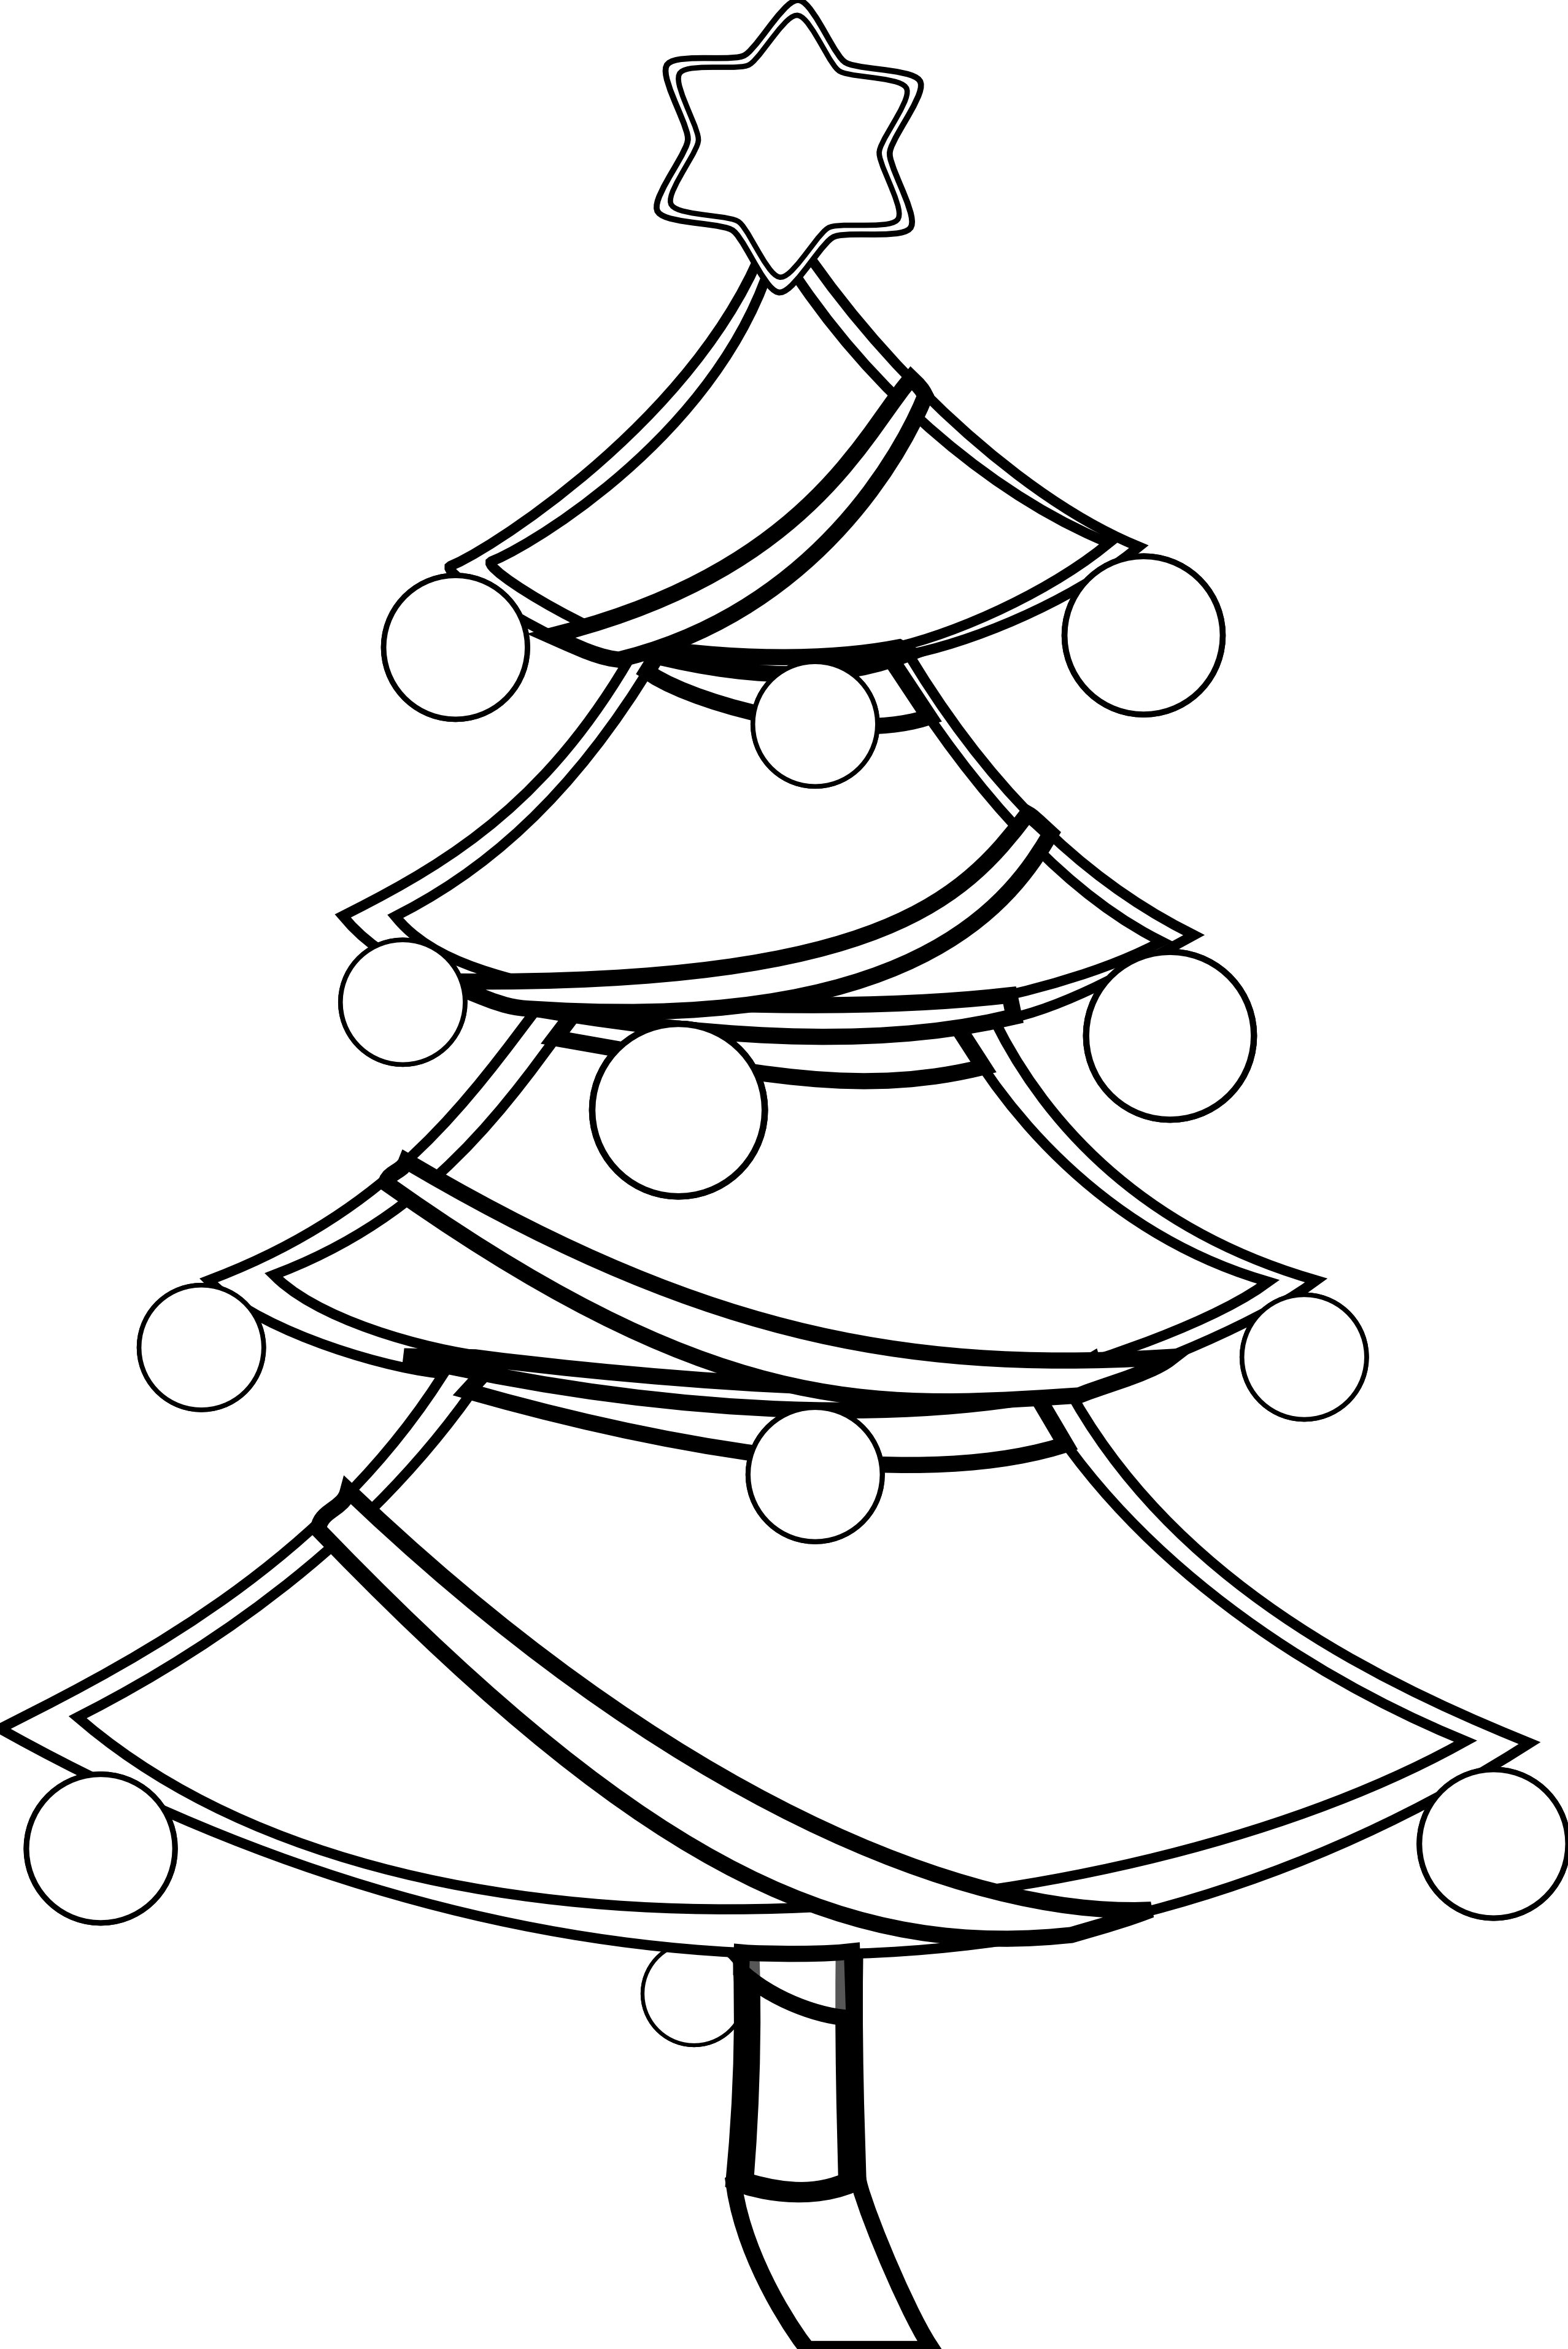 Christmas Ornament Clipart Black And White | Clipart Panda - Free ...